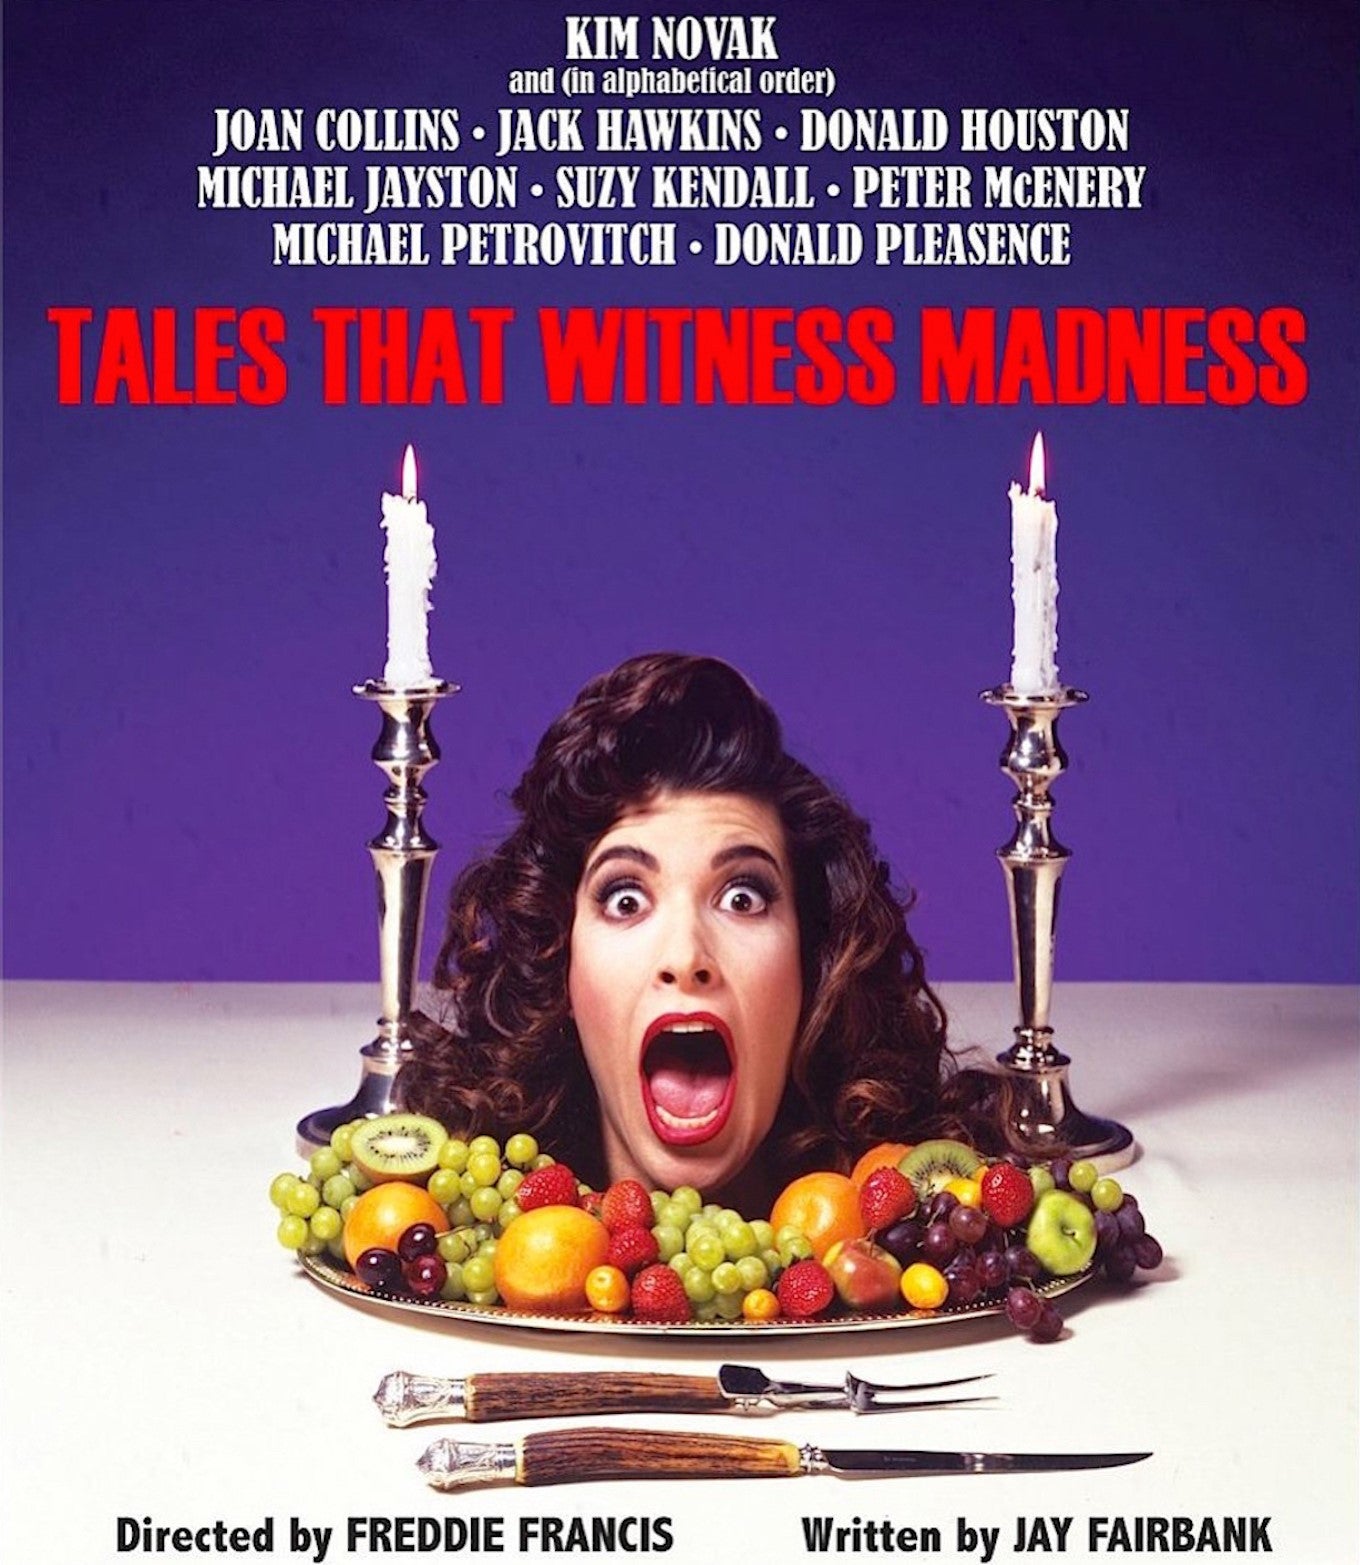 TALES THAT WITNESS MADNESS BLU-RAY